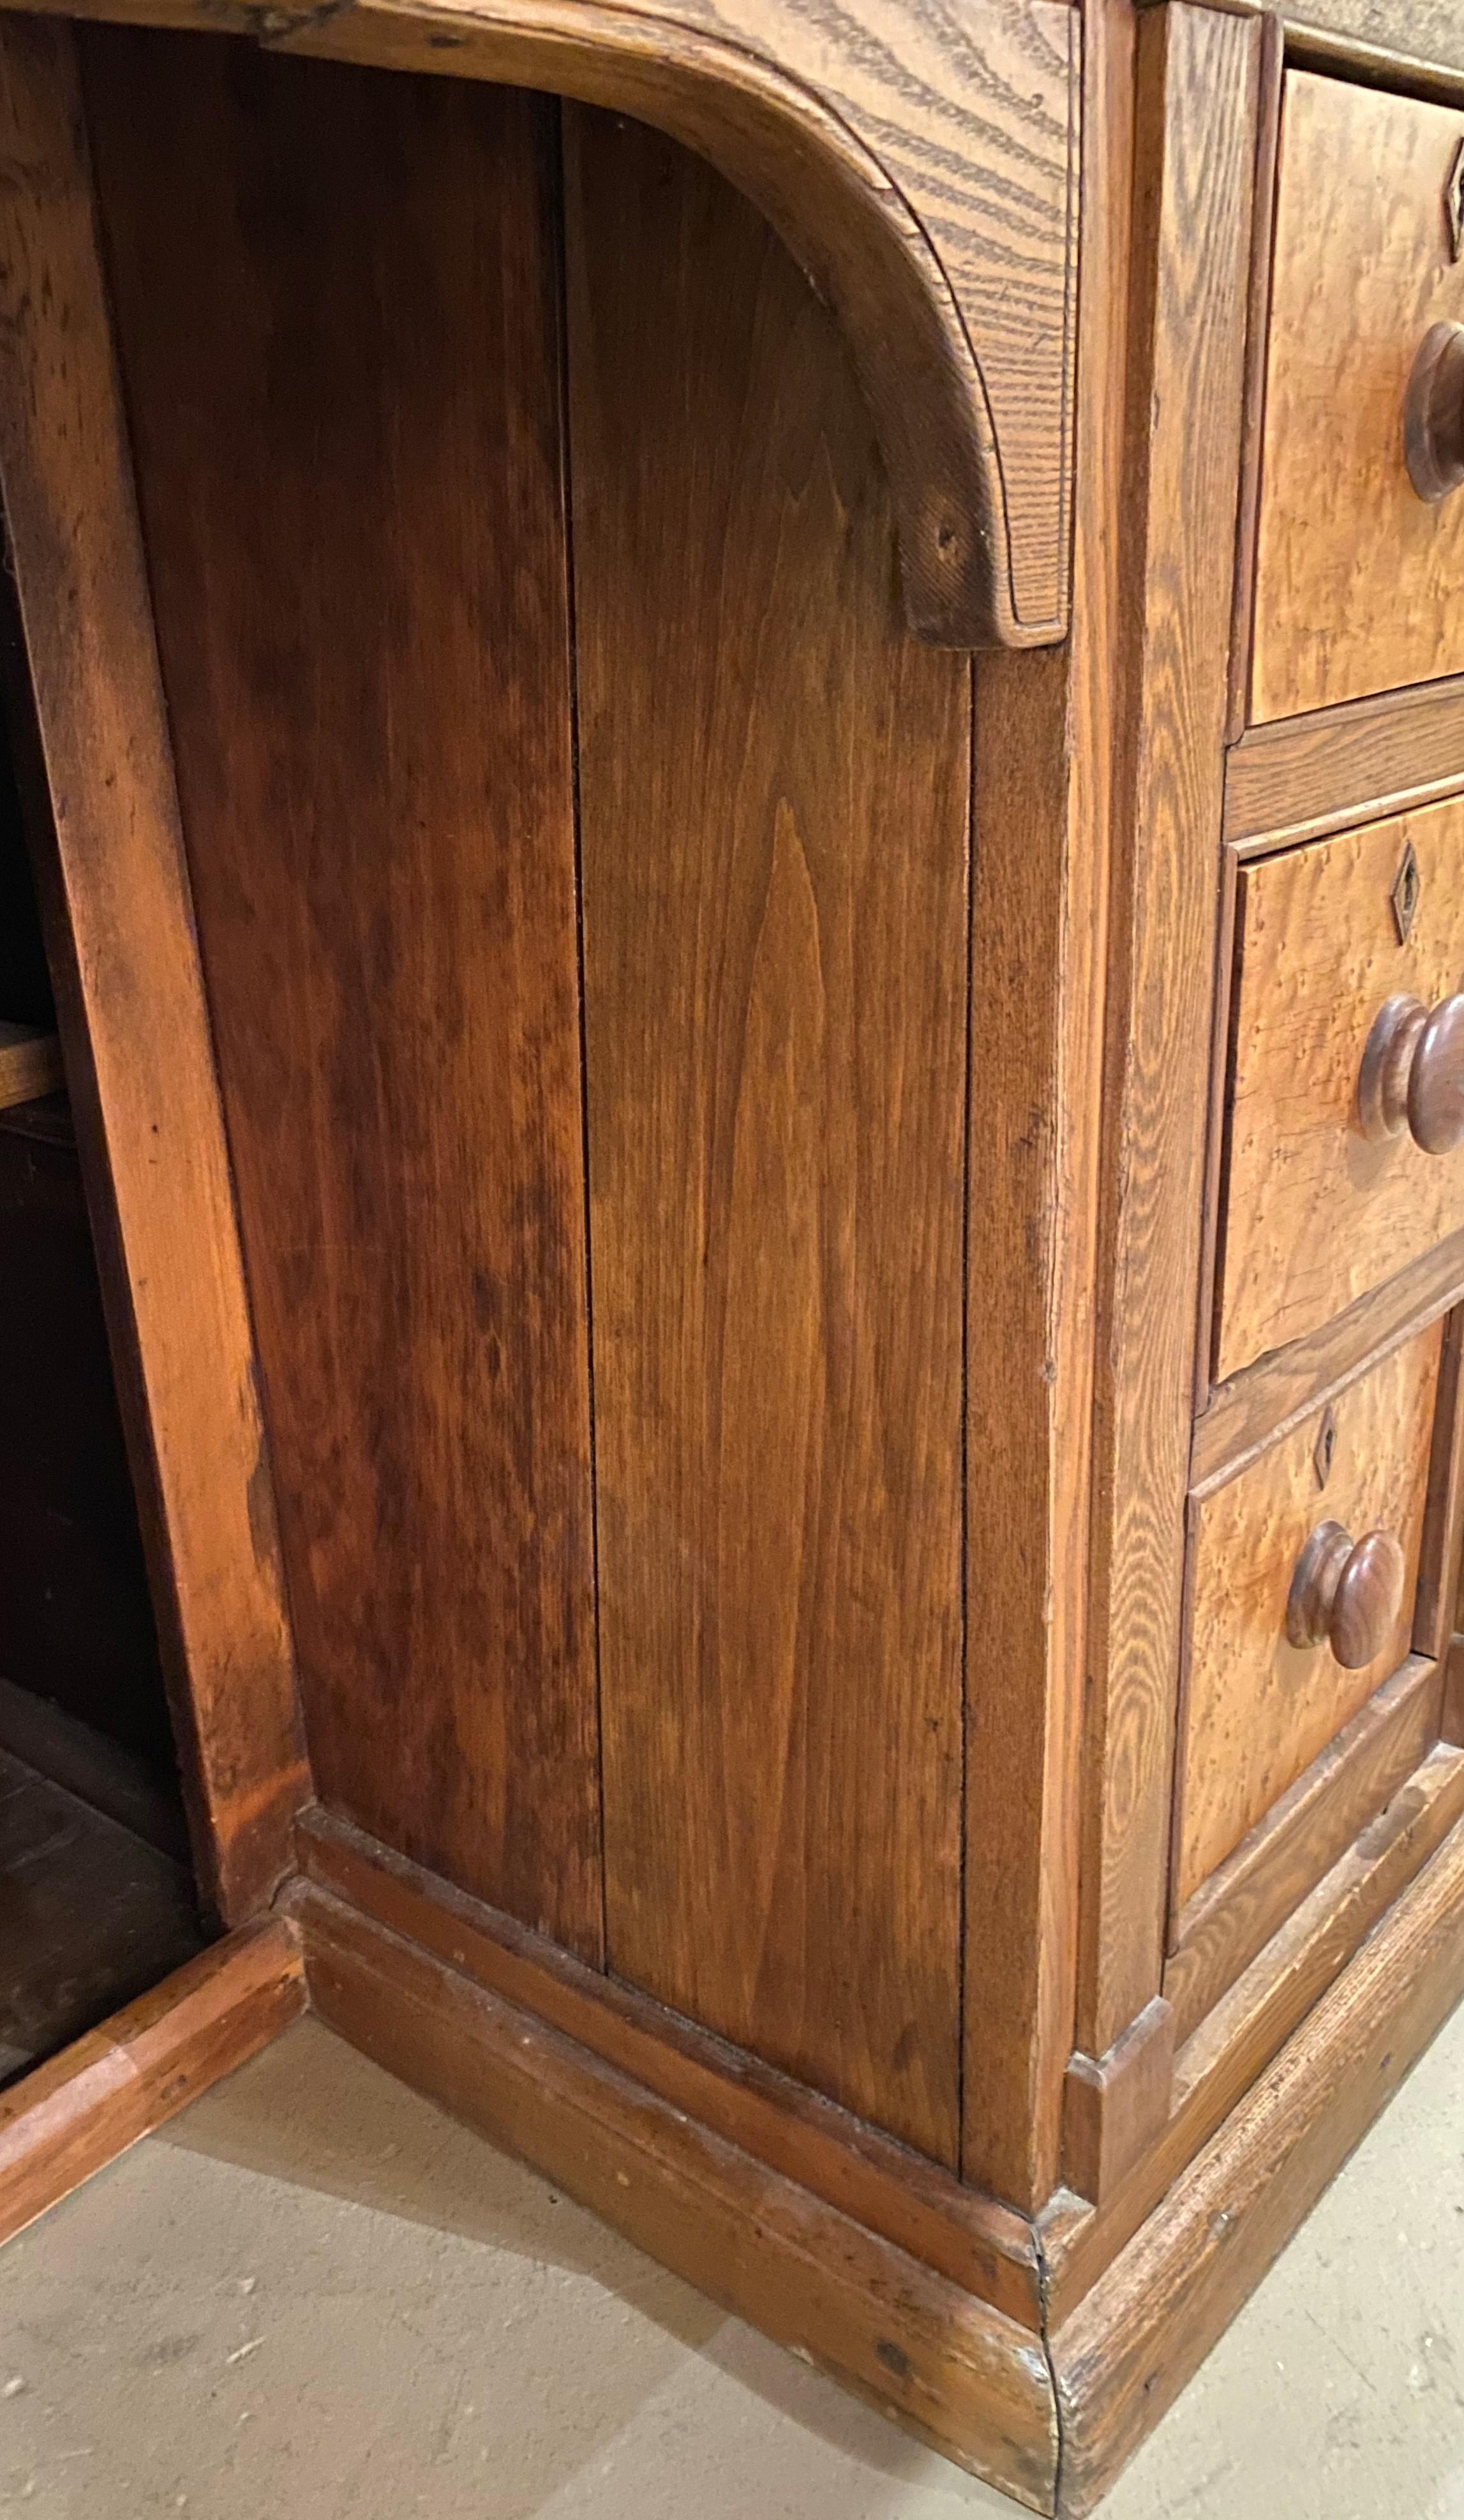 Early 20th Century Oak Store Paneled Counter or Desk w/ Birds Eye Drawer Fronts For Sale 3